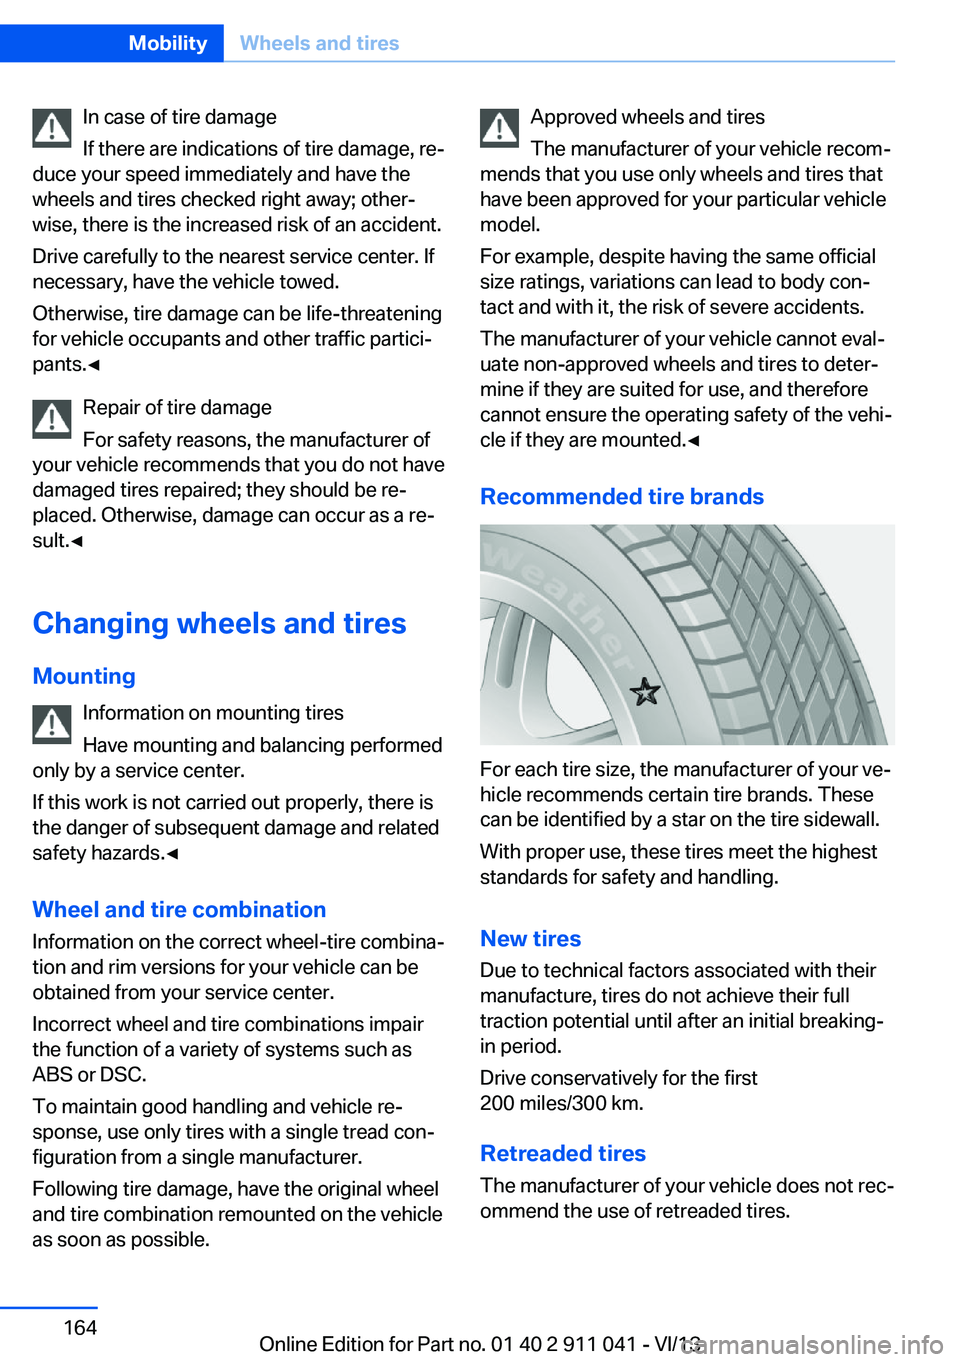 BMW X3 XDRIVE 28I 2014  Owners Manual In case of tire damage
If there are indications of tire damage, re‐
duce your speed immediately and have the
wheels and tires checked right away; other‐
wise, there is the increased risk of an acc